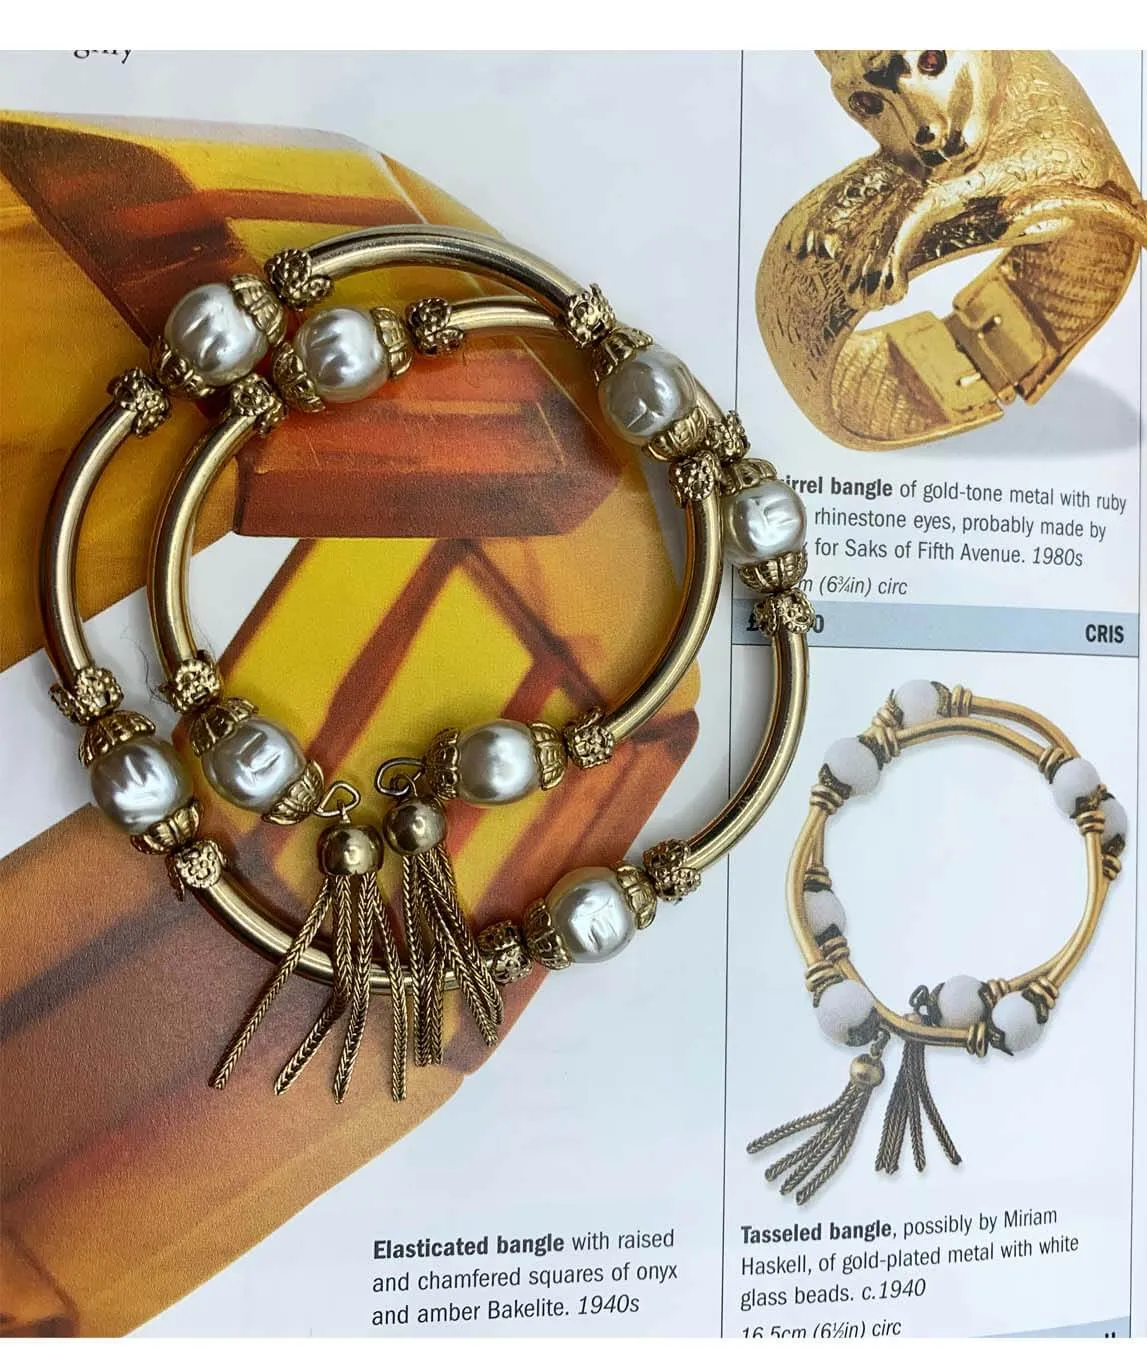 Possible Miriam Haskell bracelet with image from book